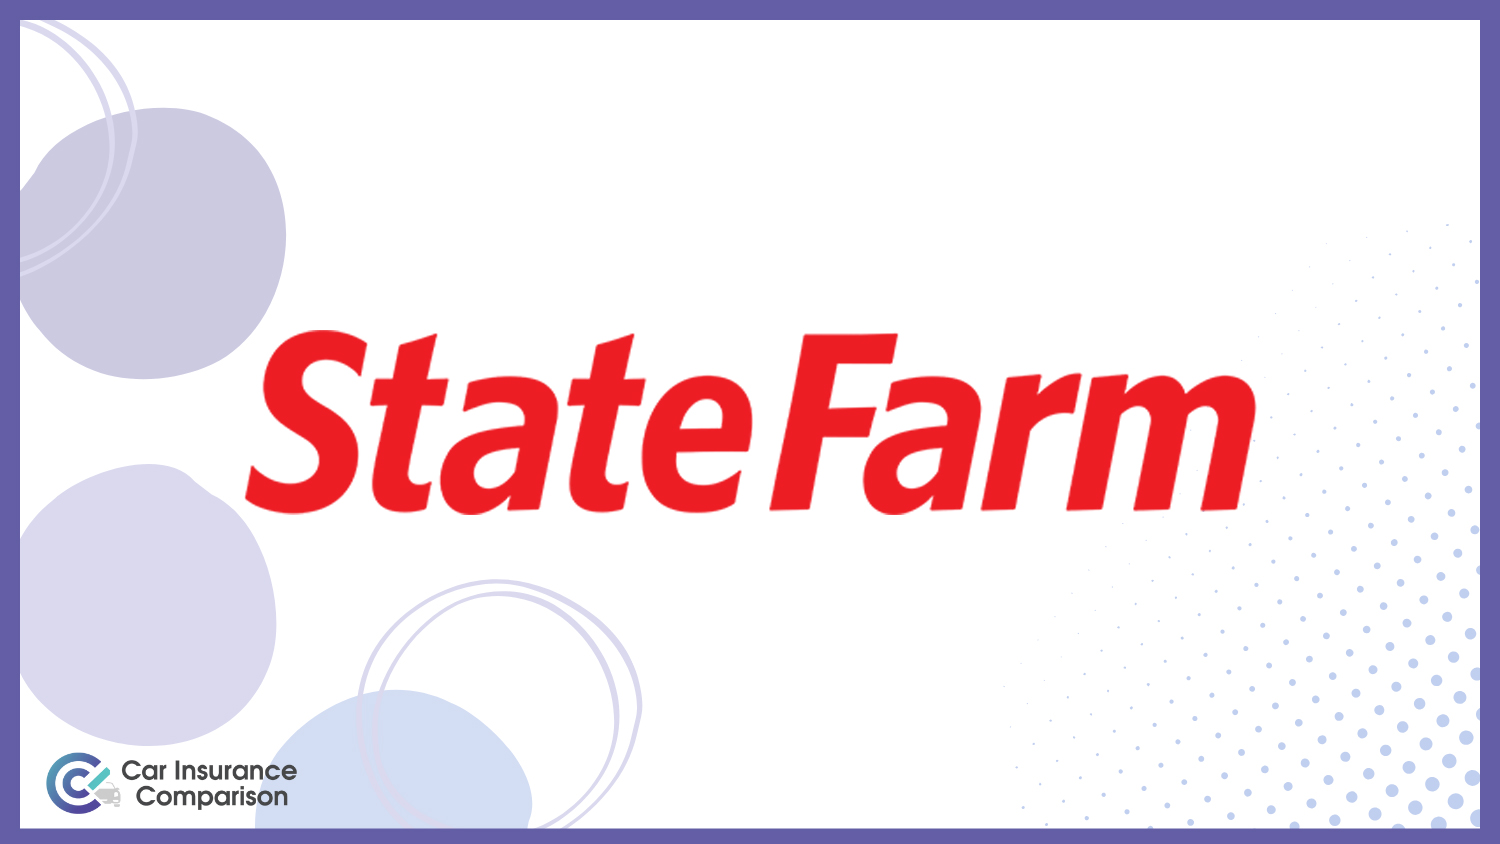 State Farm: Best Car Insurance for Specialty Vehicles